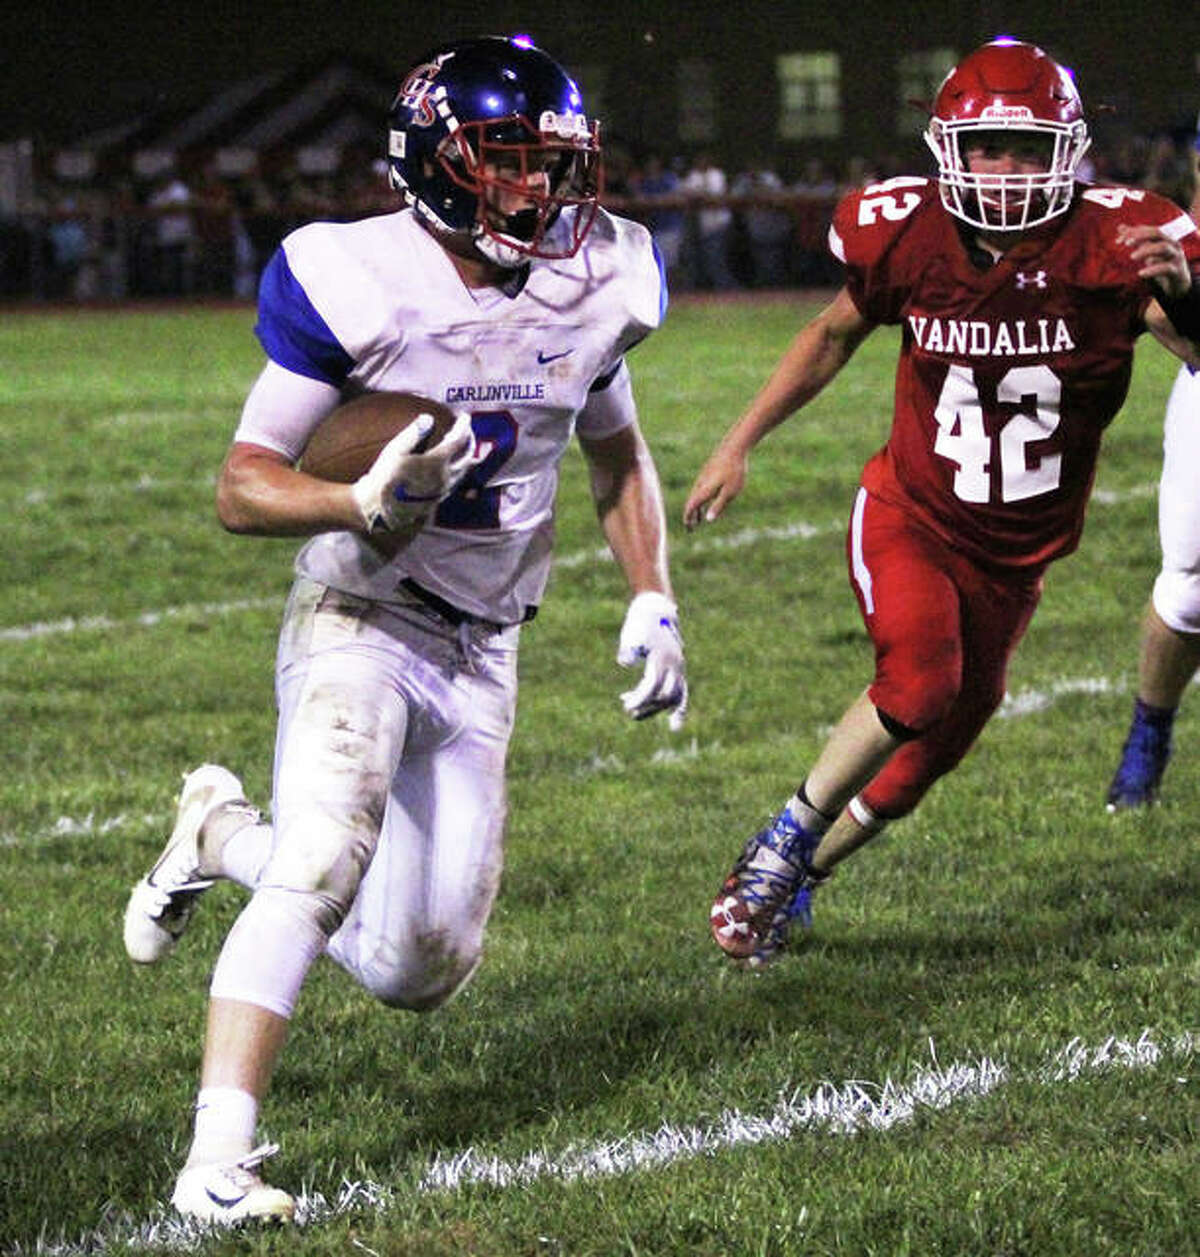 Carlinville’s Colton DeLong (left) heads upfield for a big gain with Vandalia’s Zane Ulmer chasing the play during a Cavaliers’ victory Oct. 5 in Vandalia. The 9-0 Cavaliers are at home Friday night to play EA-WR in a Class 3A playoff game.